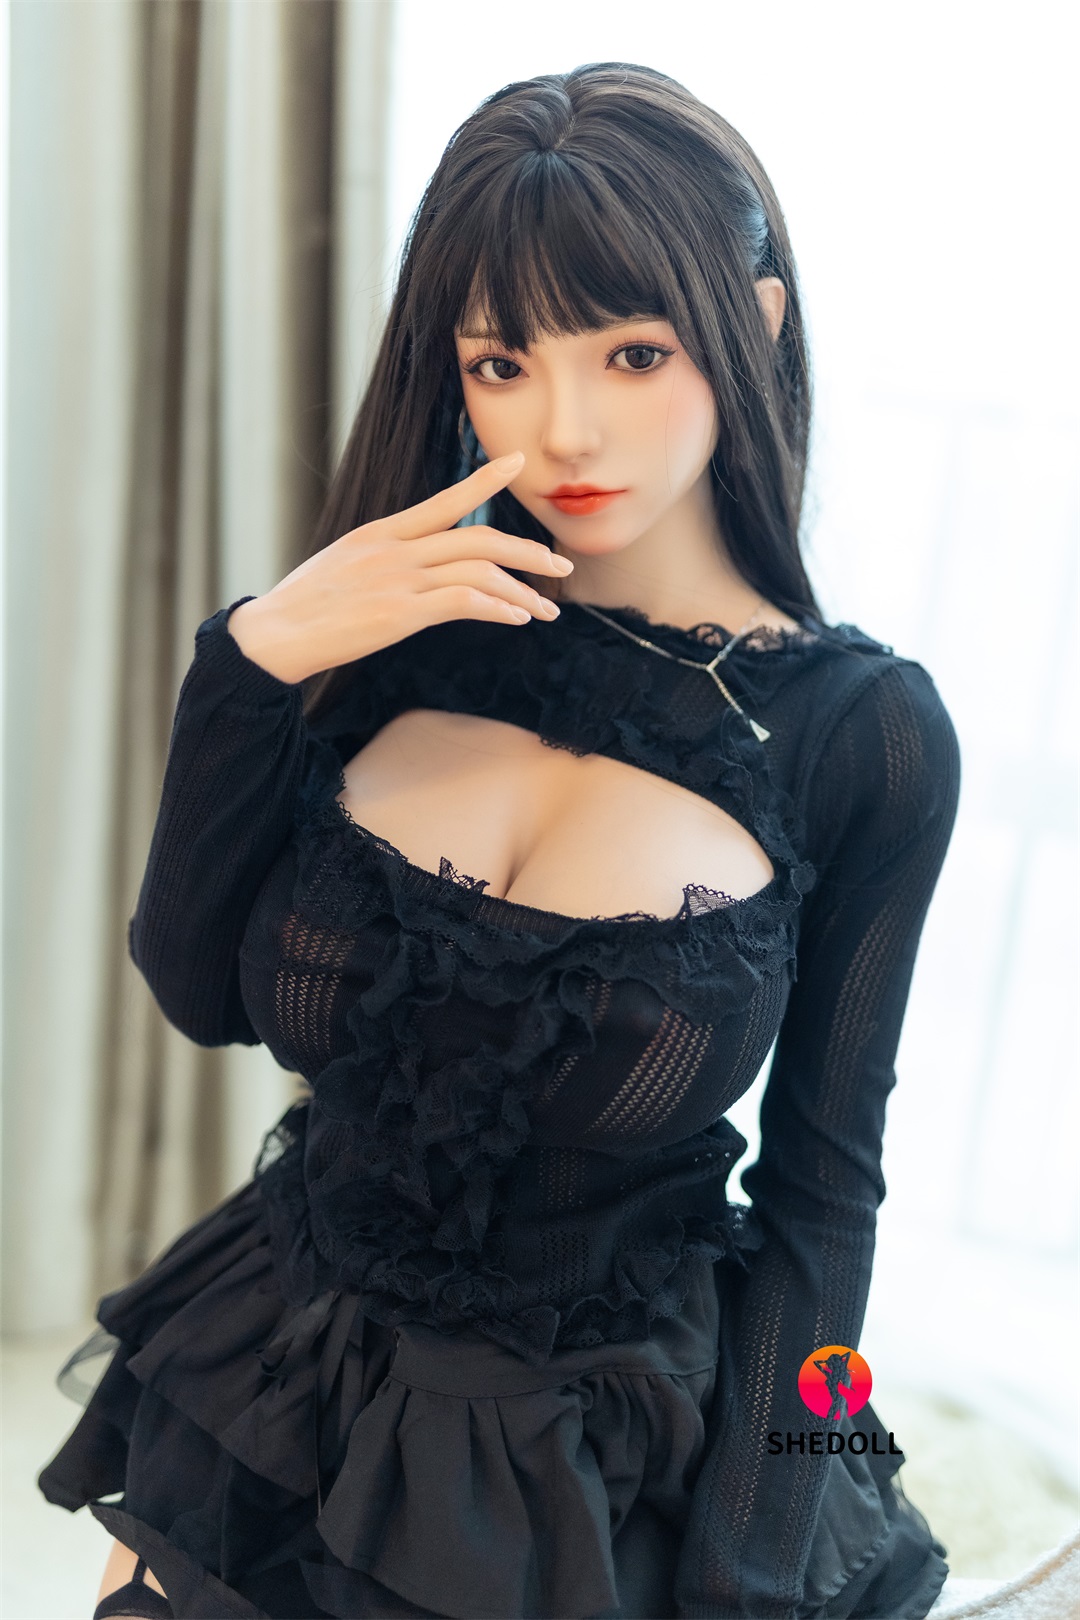 SHEDOLL | Rose-5ft4/163cm Optional ROS silicone head Sex Doll